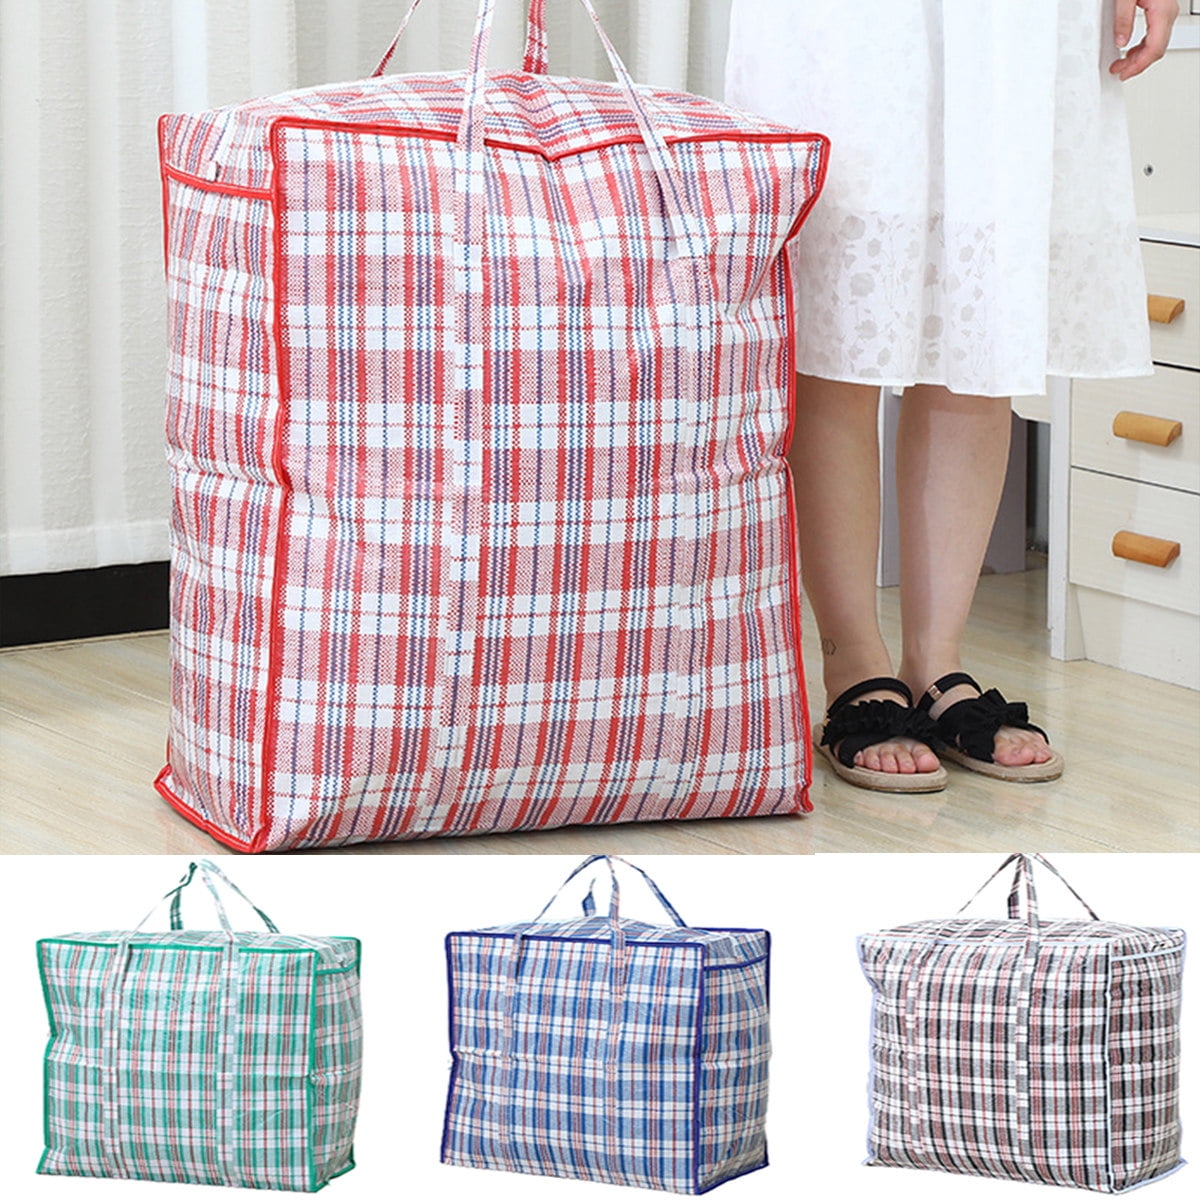 Cotton Fly Jumbo Plastic Checkered Storage Laundry Shopping Bags W. Zipper  & Handles Size=27 x 25 x6 (6 Pack)